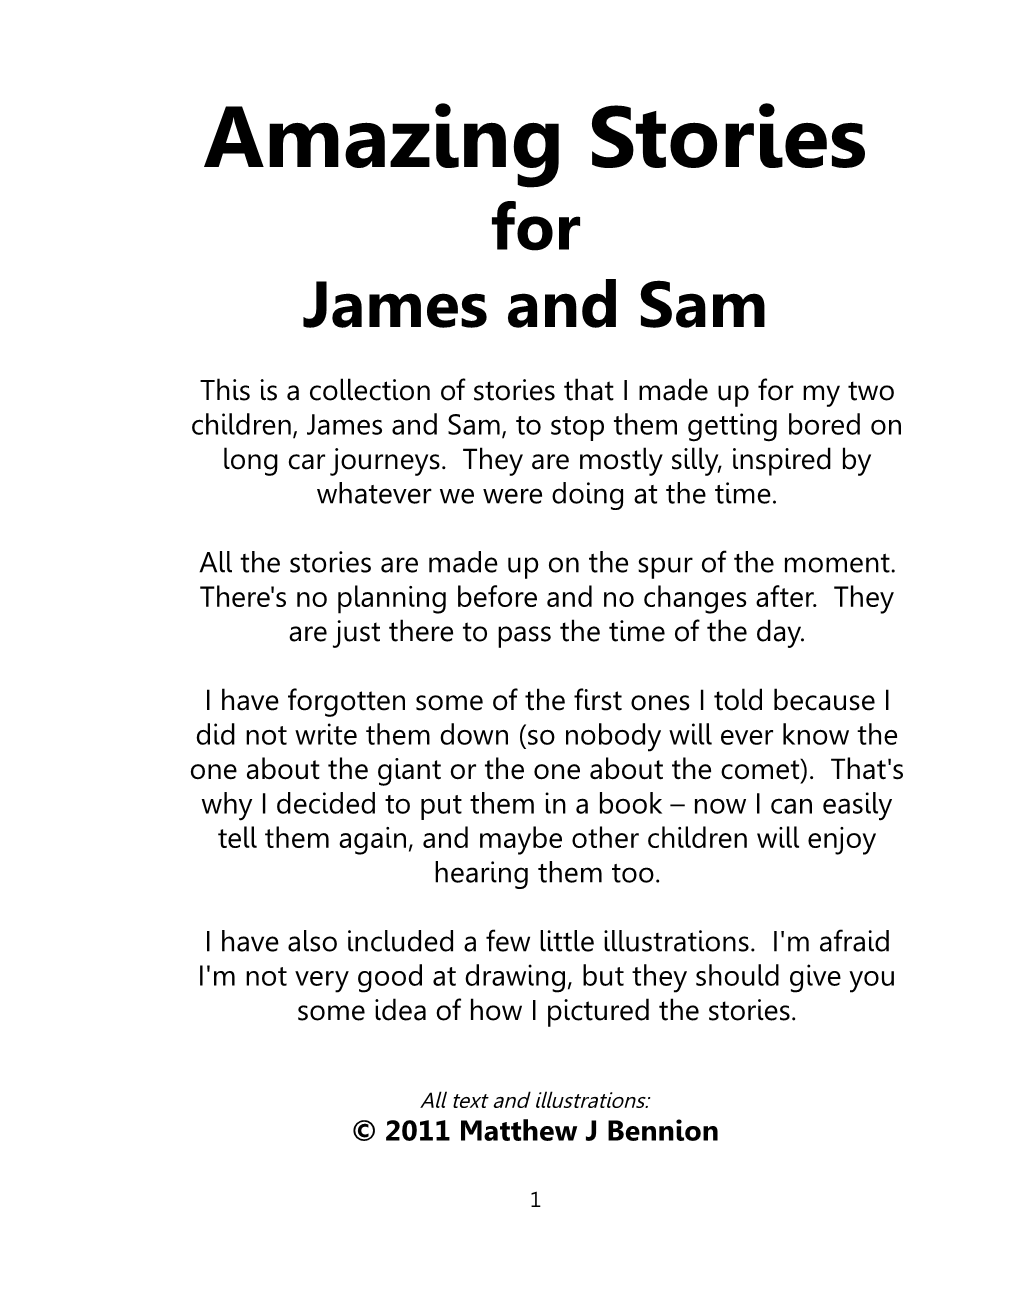 Amazing Stories for James and Sam